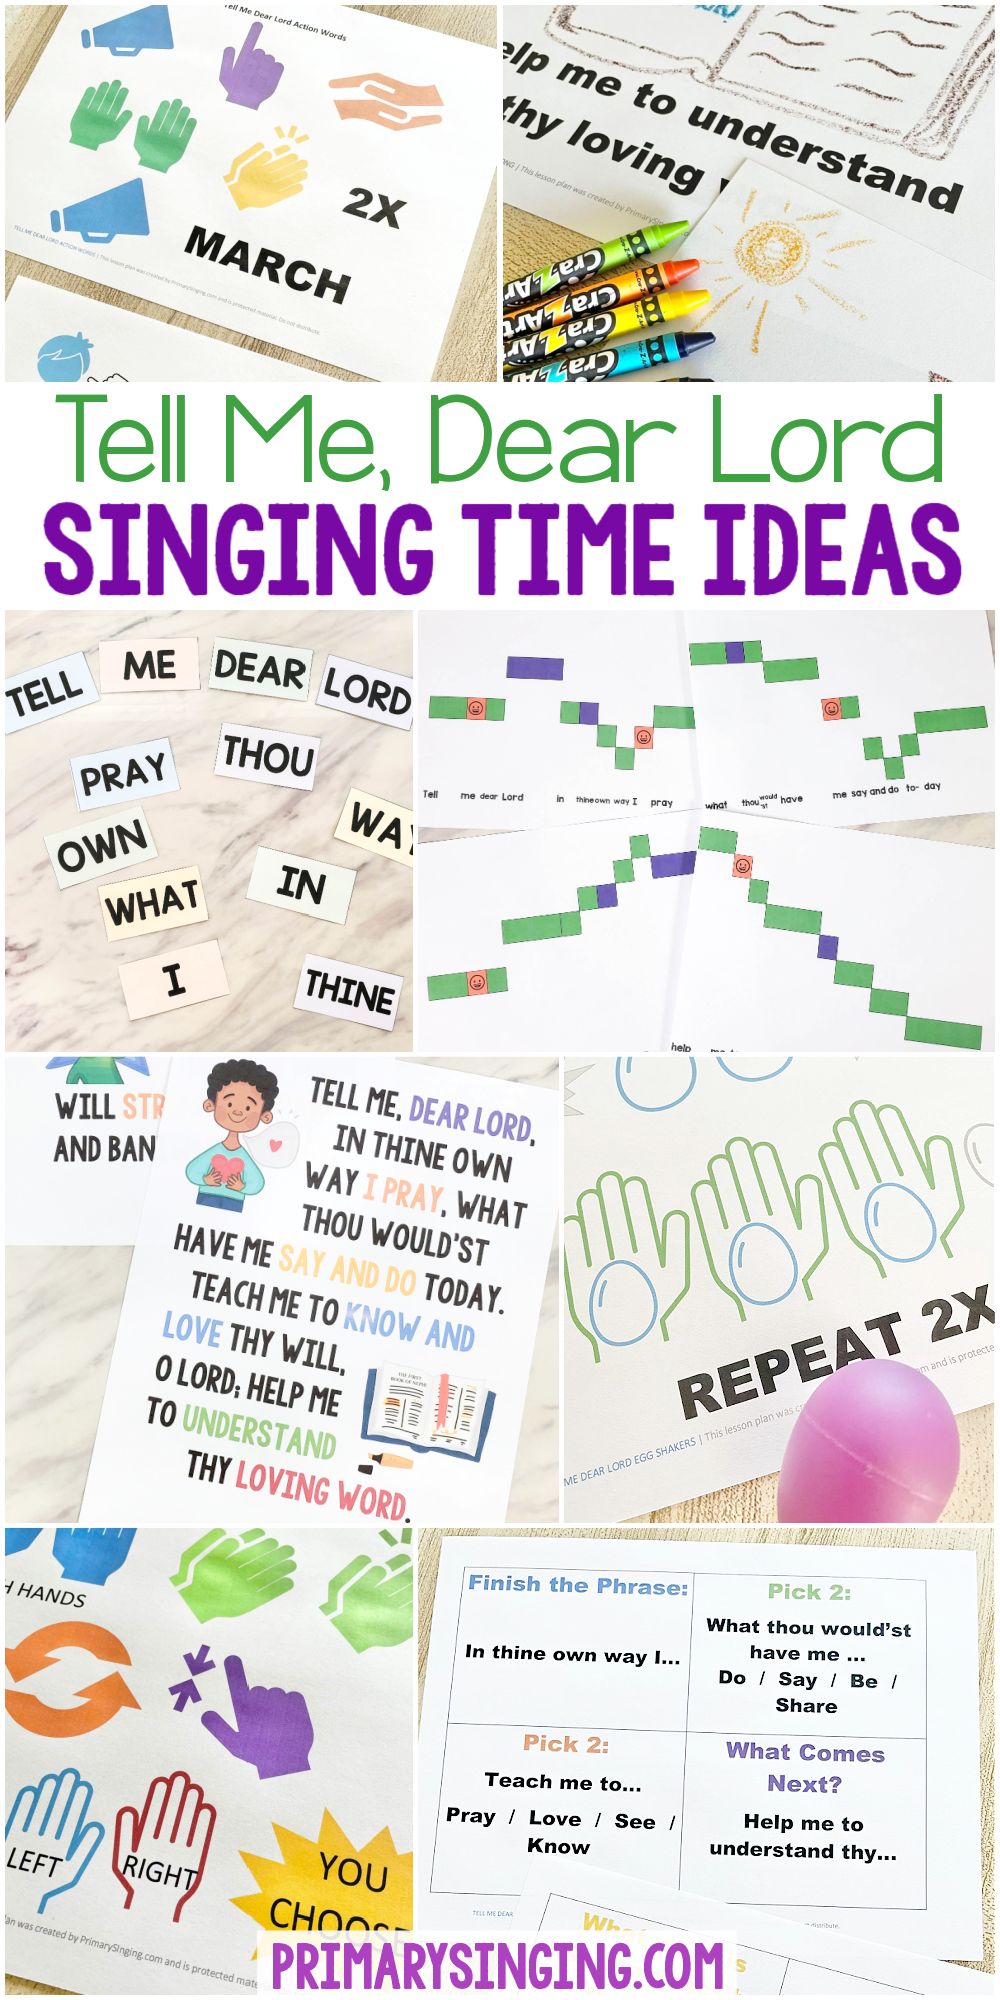 Tell Me Dear Lord Singing Time Ideas lots of fun ways to teach Tell Me Dear Lord Primary song with printable song helps for Primary Music Leaders! Includes egg shakers, crack the code, melody map, action words, song quiz and many more!